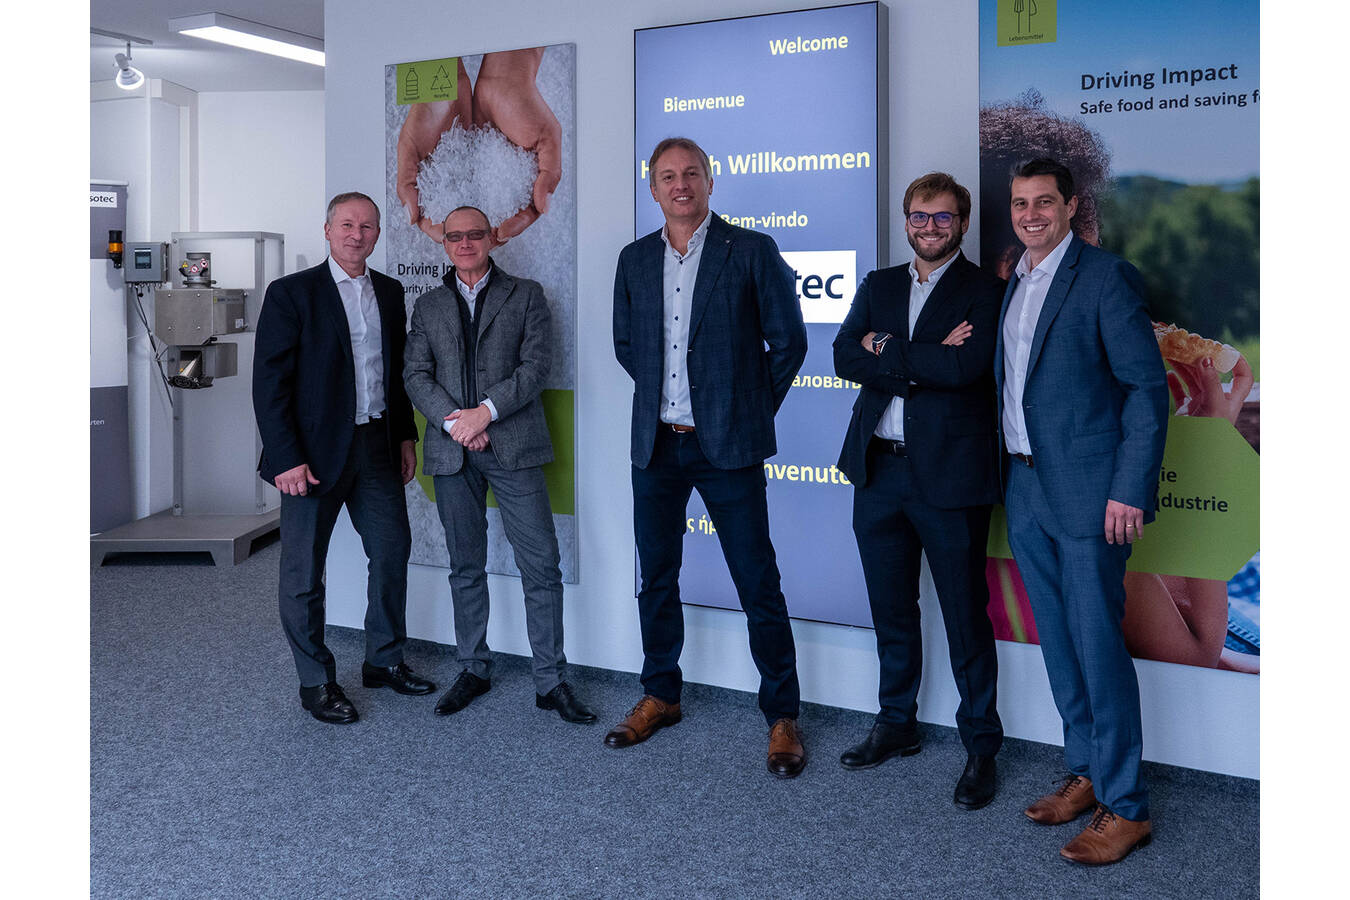 Joachim Schulz, CEO of Sesotec (pictured left) and Johannes von Stein, Vice President of Sales, Food (pictured right) greet their new Italian colleagues: Ulf Stöckelmann, Country Sales Manager Plast (second from left); Paolo Mauri, Country Manager (center